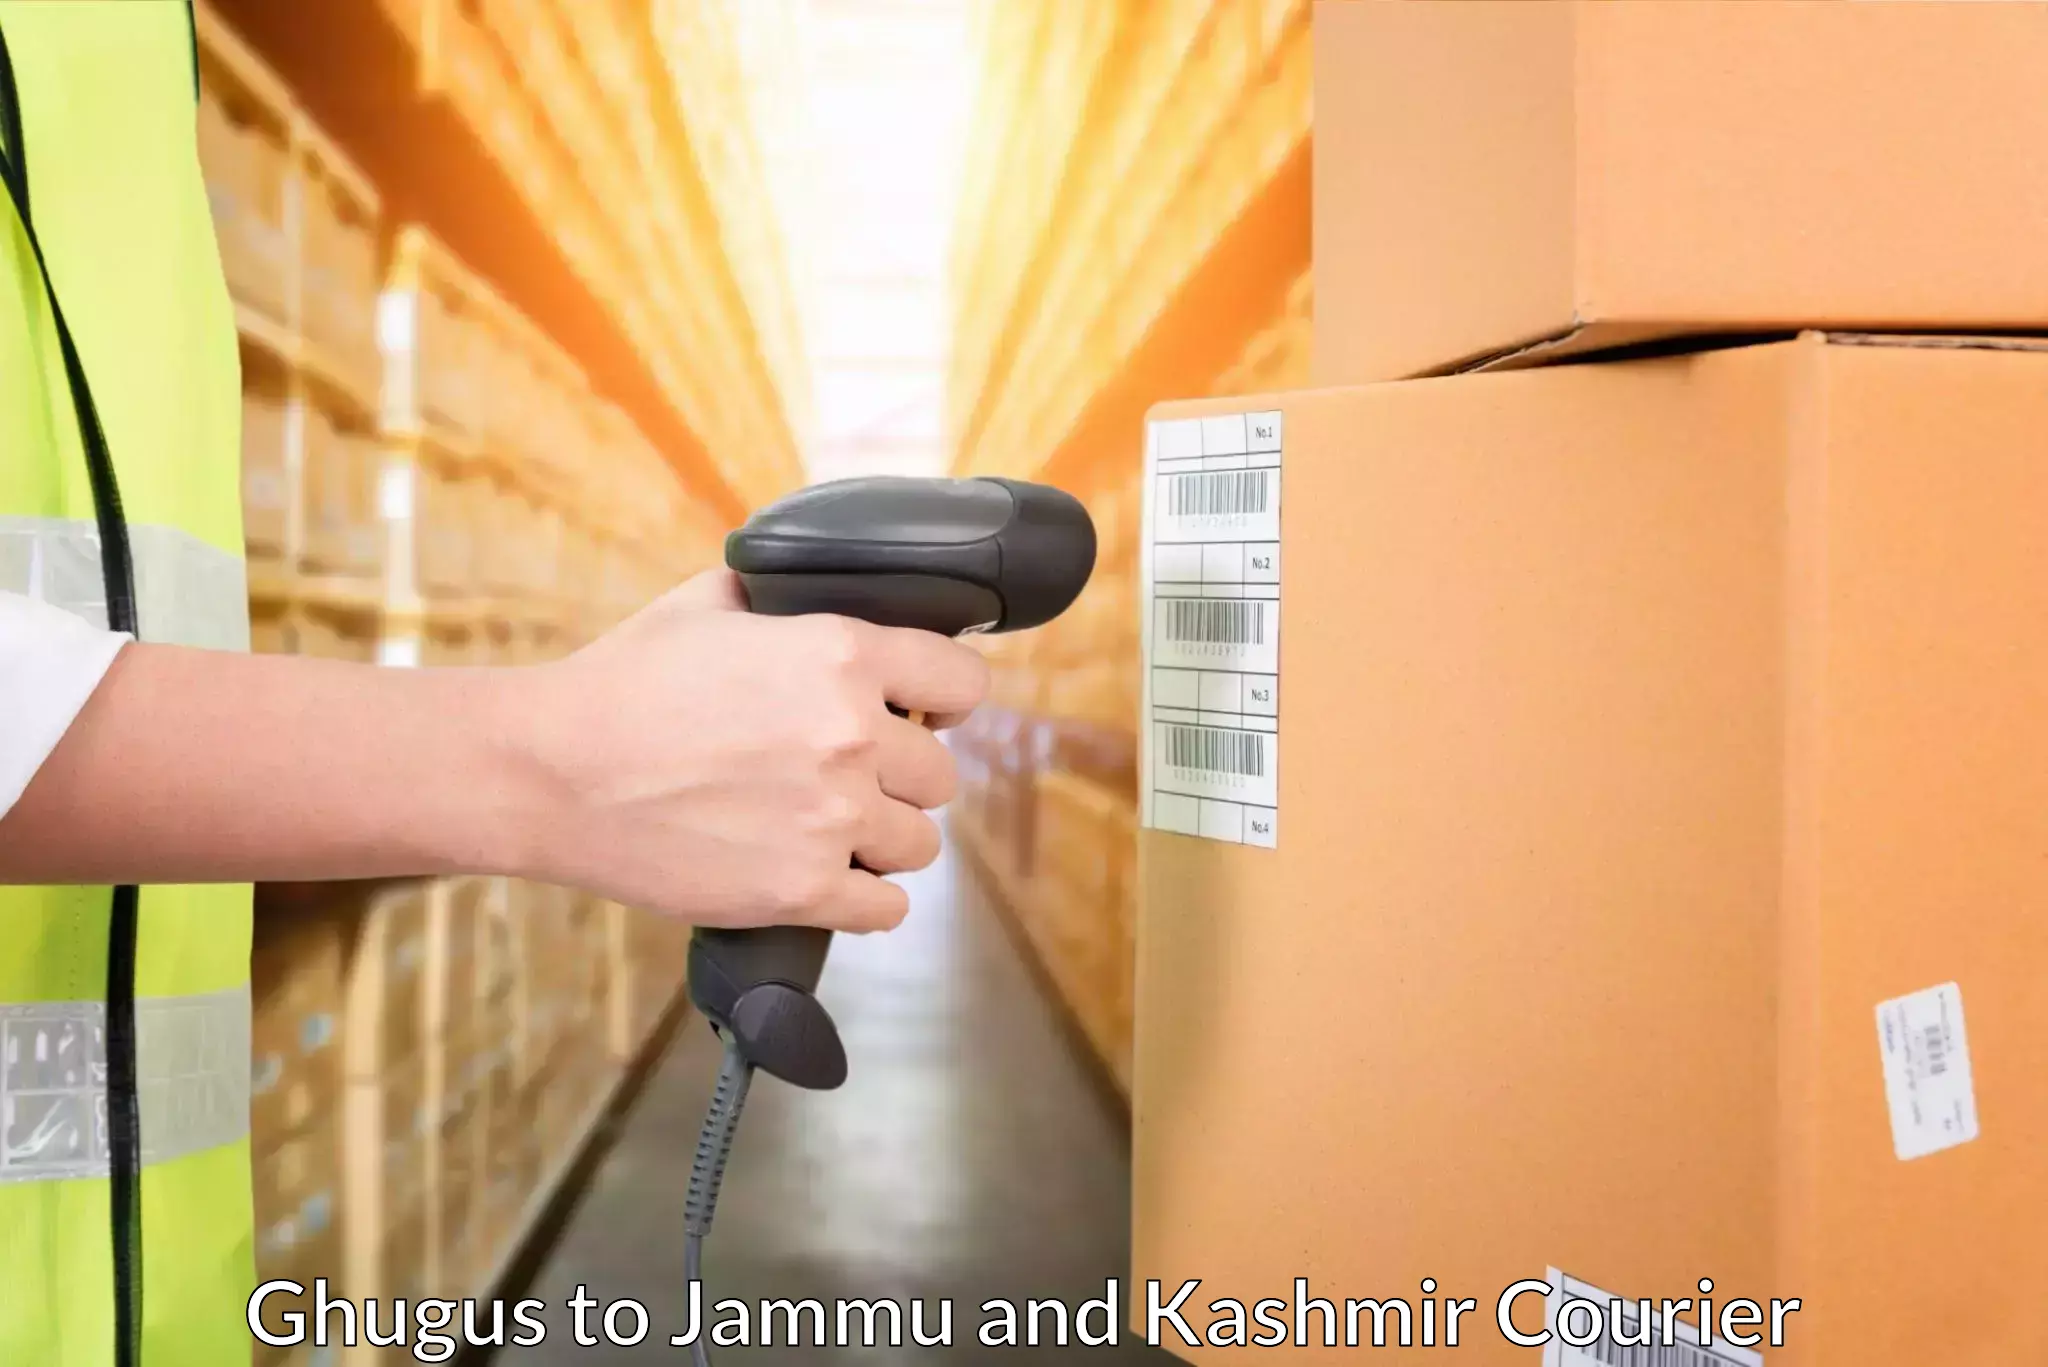 High-priority parcel service Ghugus to Jammu and Kashmir